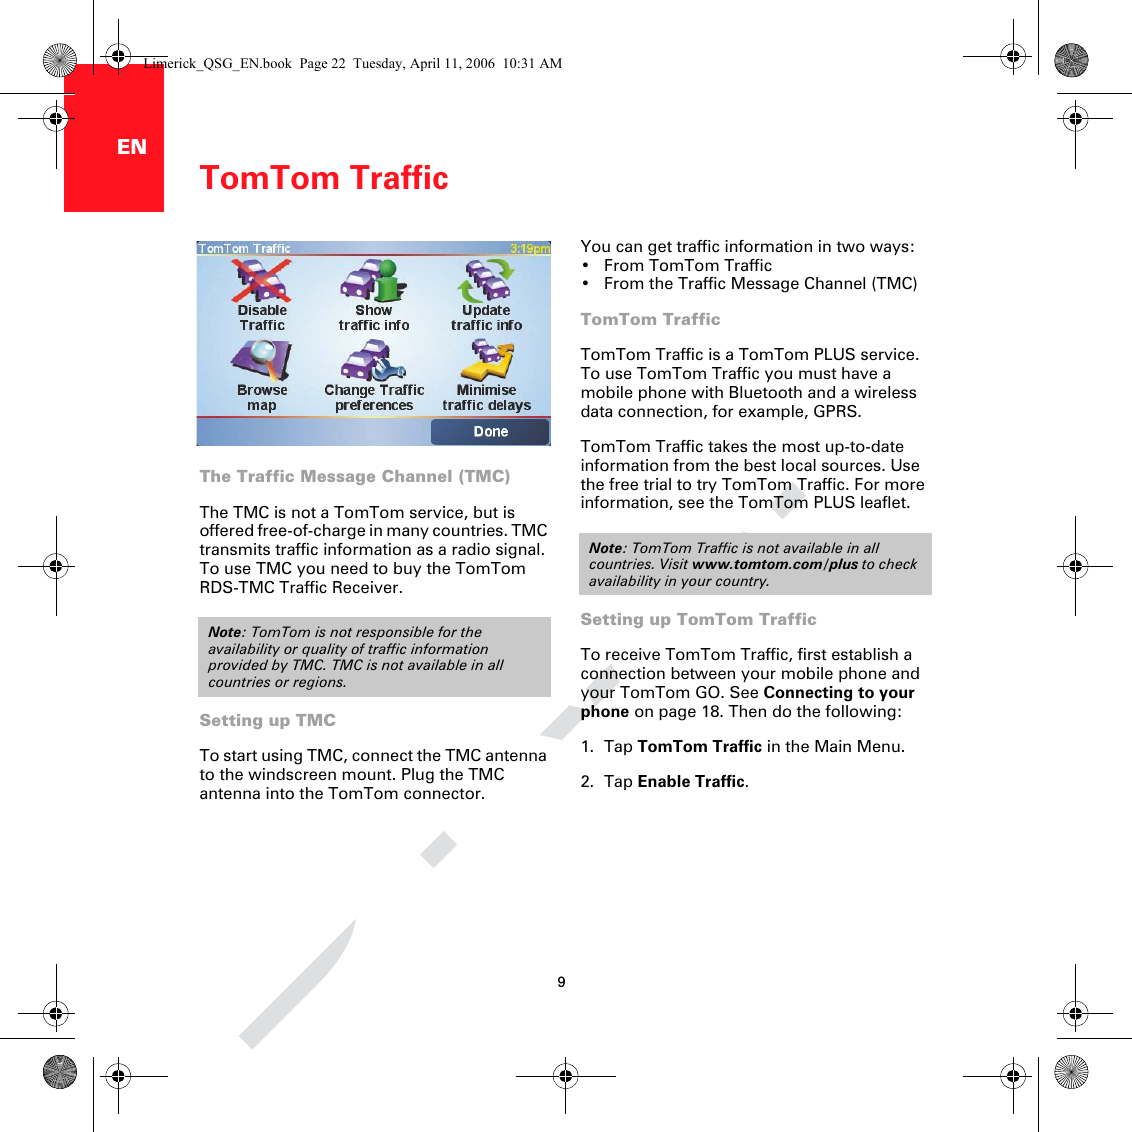 DRAFTomTom Traffic9ENTomTomTraffic You can get traffic information in two ways:• From TomTom Traffic• From the Traffic Message Channel (TMC)TomTom TrafficTomTom Traffic is a TomTom PLUS service. To use TomTom Traffic you must have a mobile phone with Bluetooth and a wireless data connection, for example, GPRS.TomTom Traffic takes the most up-to-date information from the best local sources. Use the free trial to try TomTom Traffic. For more information, see the TomTom PLUS leaflet.Setting up TomTom TrafficTo receive TomTom Traffic, first establish a connection between your mobile phone and your TomTom GO. See Connecting to your phone on page 18. Then do the following:1. Tap TomTom Traffic in the Main Menu.2. Tap Enable Traffic.Note: TomTom Traffic is not available in all countries. Visit www.tomtom.com/plus to check availability in your country.The Traffic Message Channel (TMC)The TMC is not a TomTom service, but is offered free-of-charge in many countries. TMC transmits traffic information as a radio signal. To use TMC you need to buy the TomTom RDS-TMC Traffic Receiver. Setting up TMCTo start using TMC, connect the TMC antenna to the windscreen mount. Plug the TMC antenna into the TomTom connector.Note: TomTom is not responsible for the availability or quality of traffic information provided by TMC. TMC is not available in all countries or regions.Limerick_QSG_EN.book  Page 22  Tuesday, April 11, 2006  10:31 AM